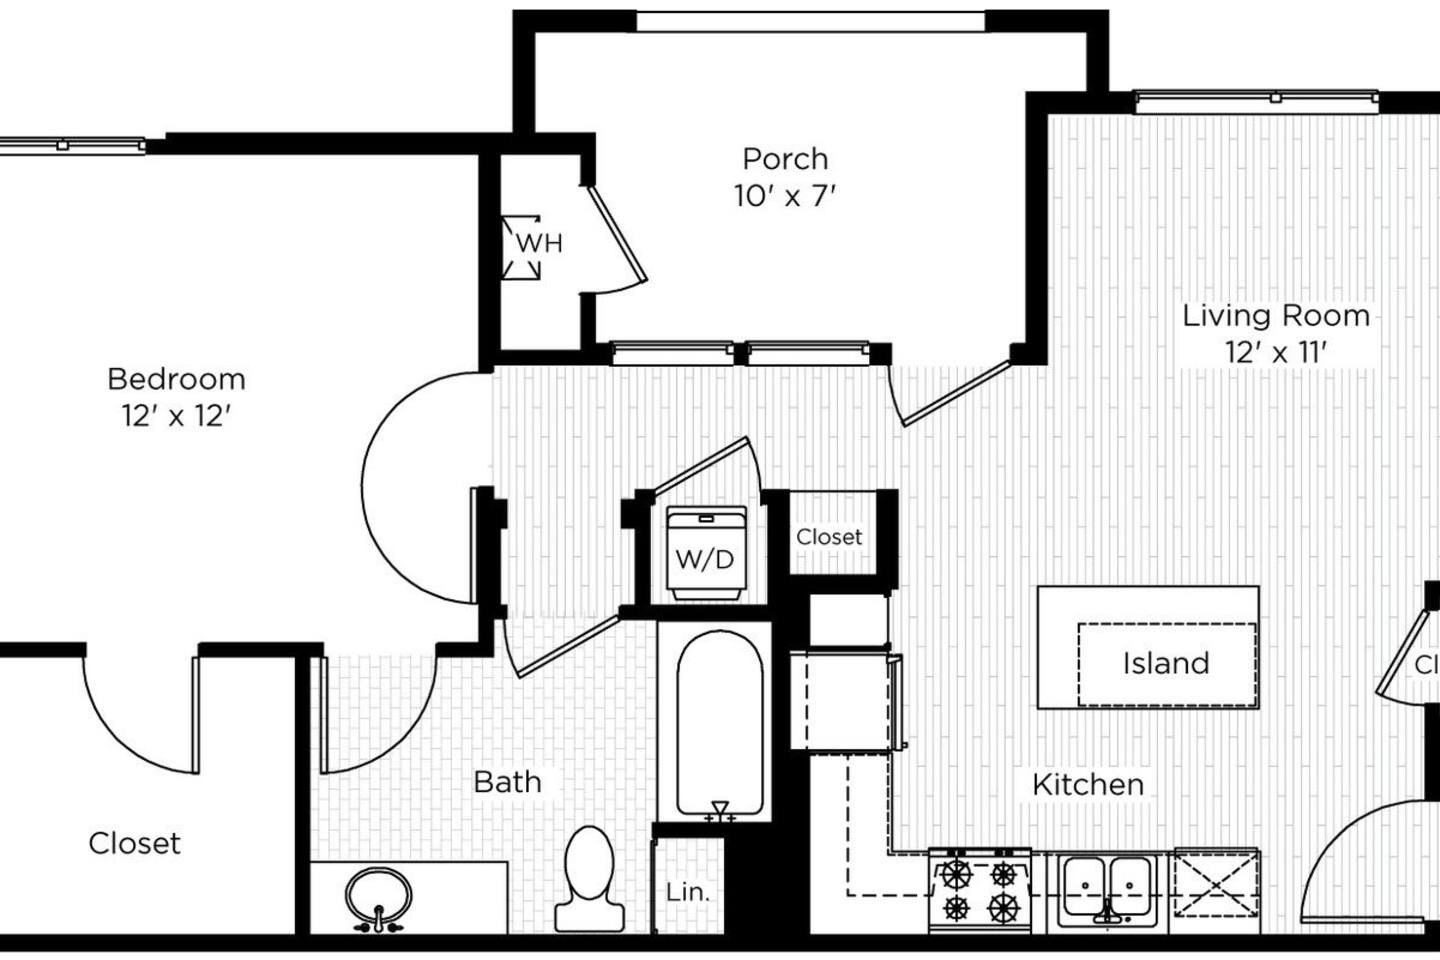 Floorplan diagram for The Aster South - 1AC, showing 1 bedroom